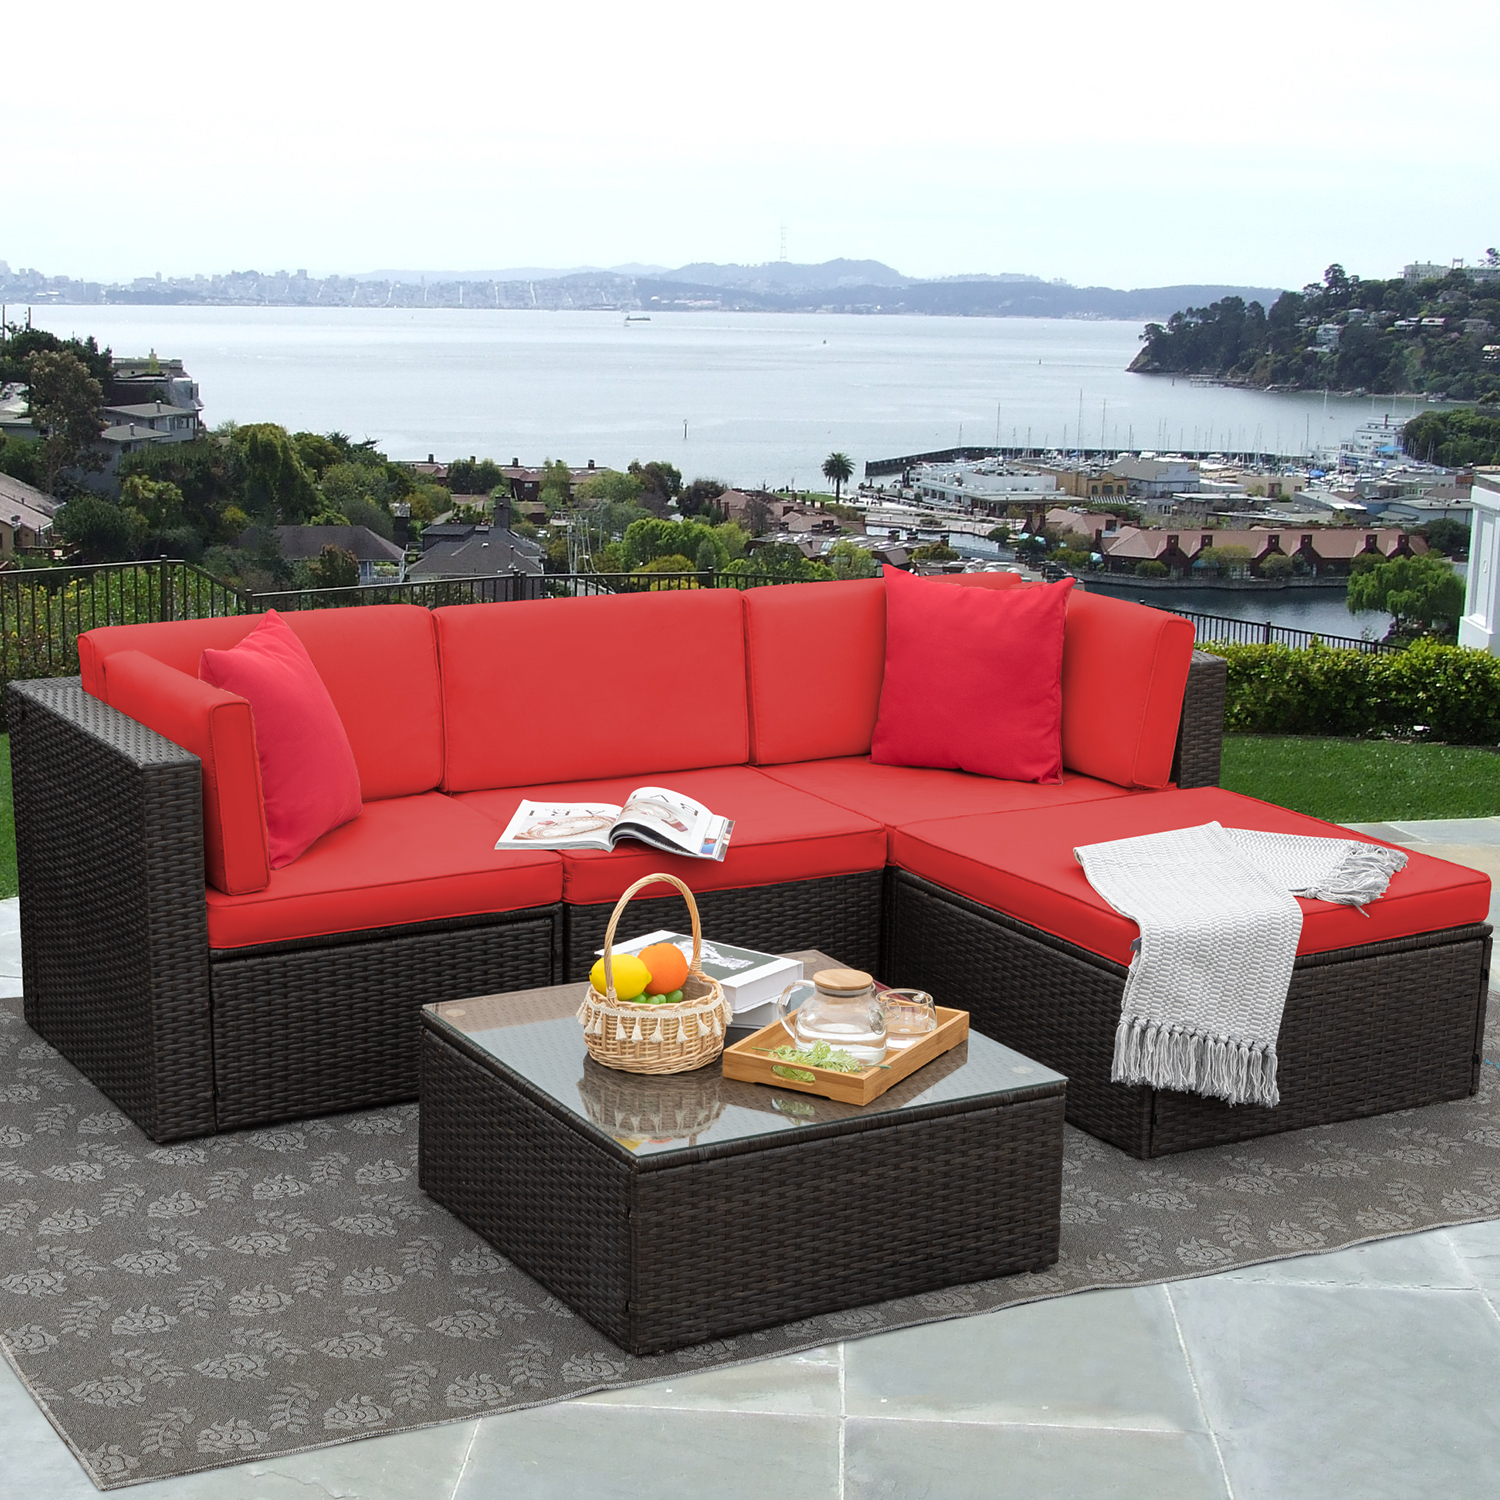 LACOO 5 Pieces Patio Conversation Set Rattan Outdoor Sectional Set with Chushions and Table(Red) - image 2 of 7